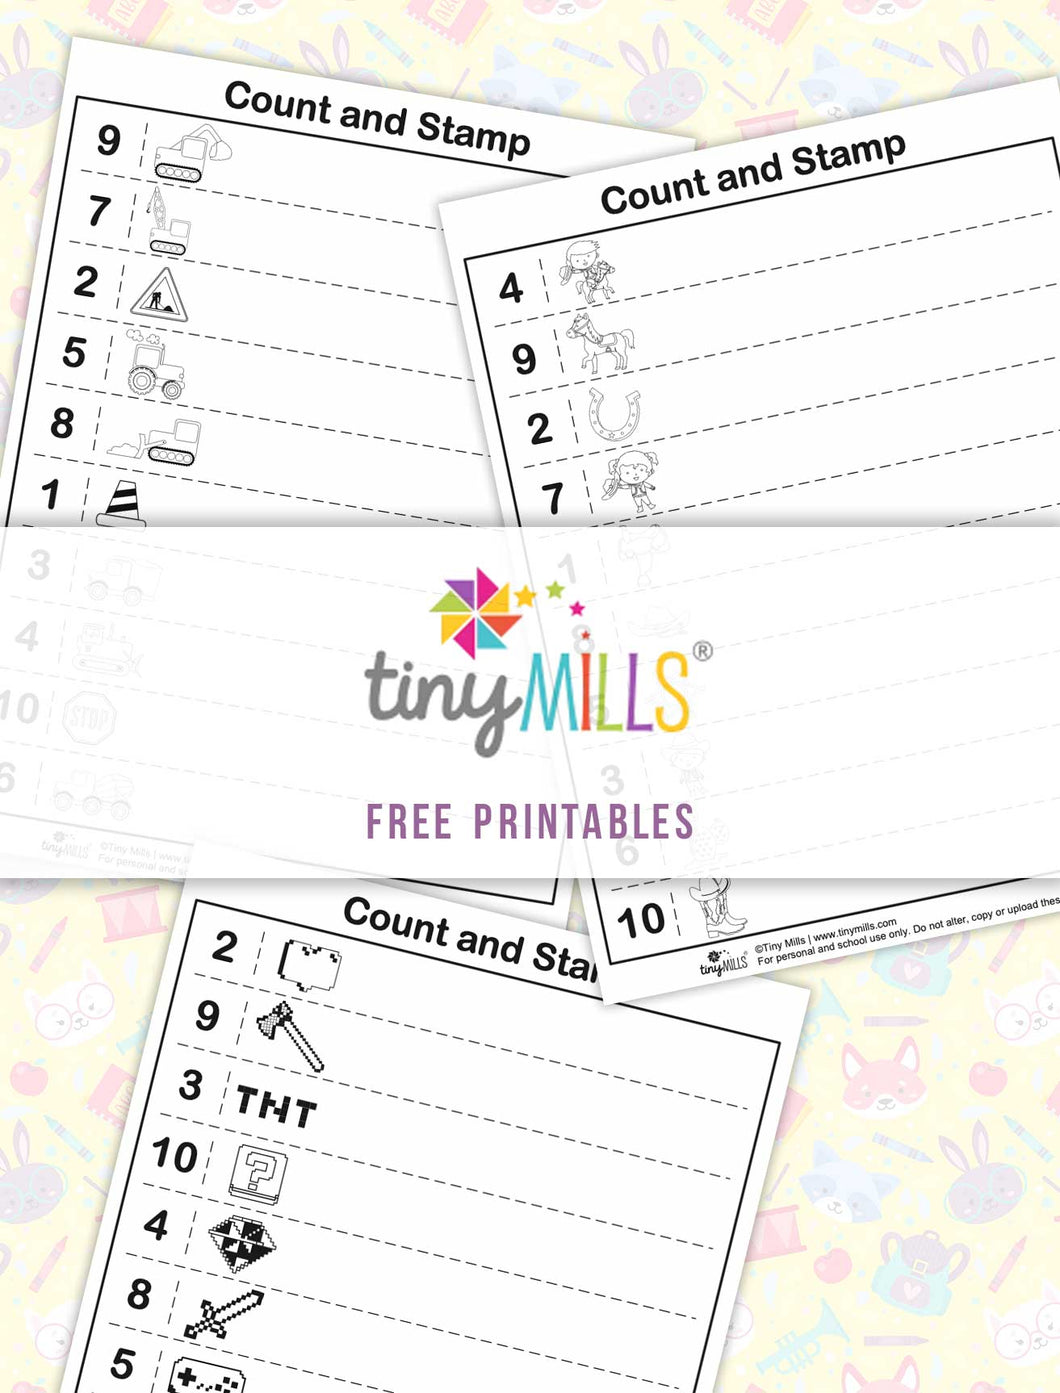 Free Printable Count & Stamp Math Worksheets for Boys - 3 Designs